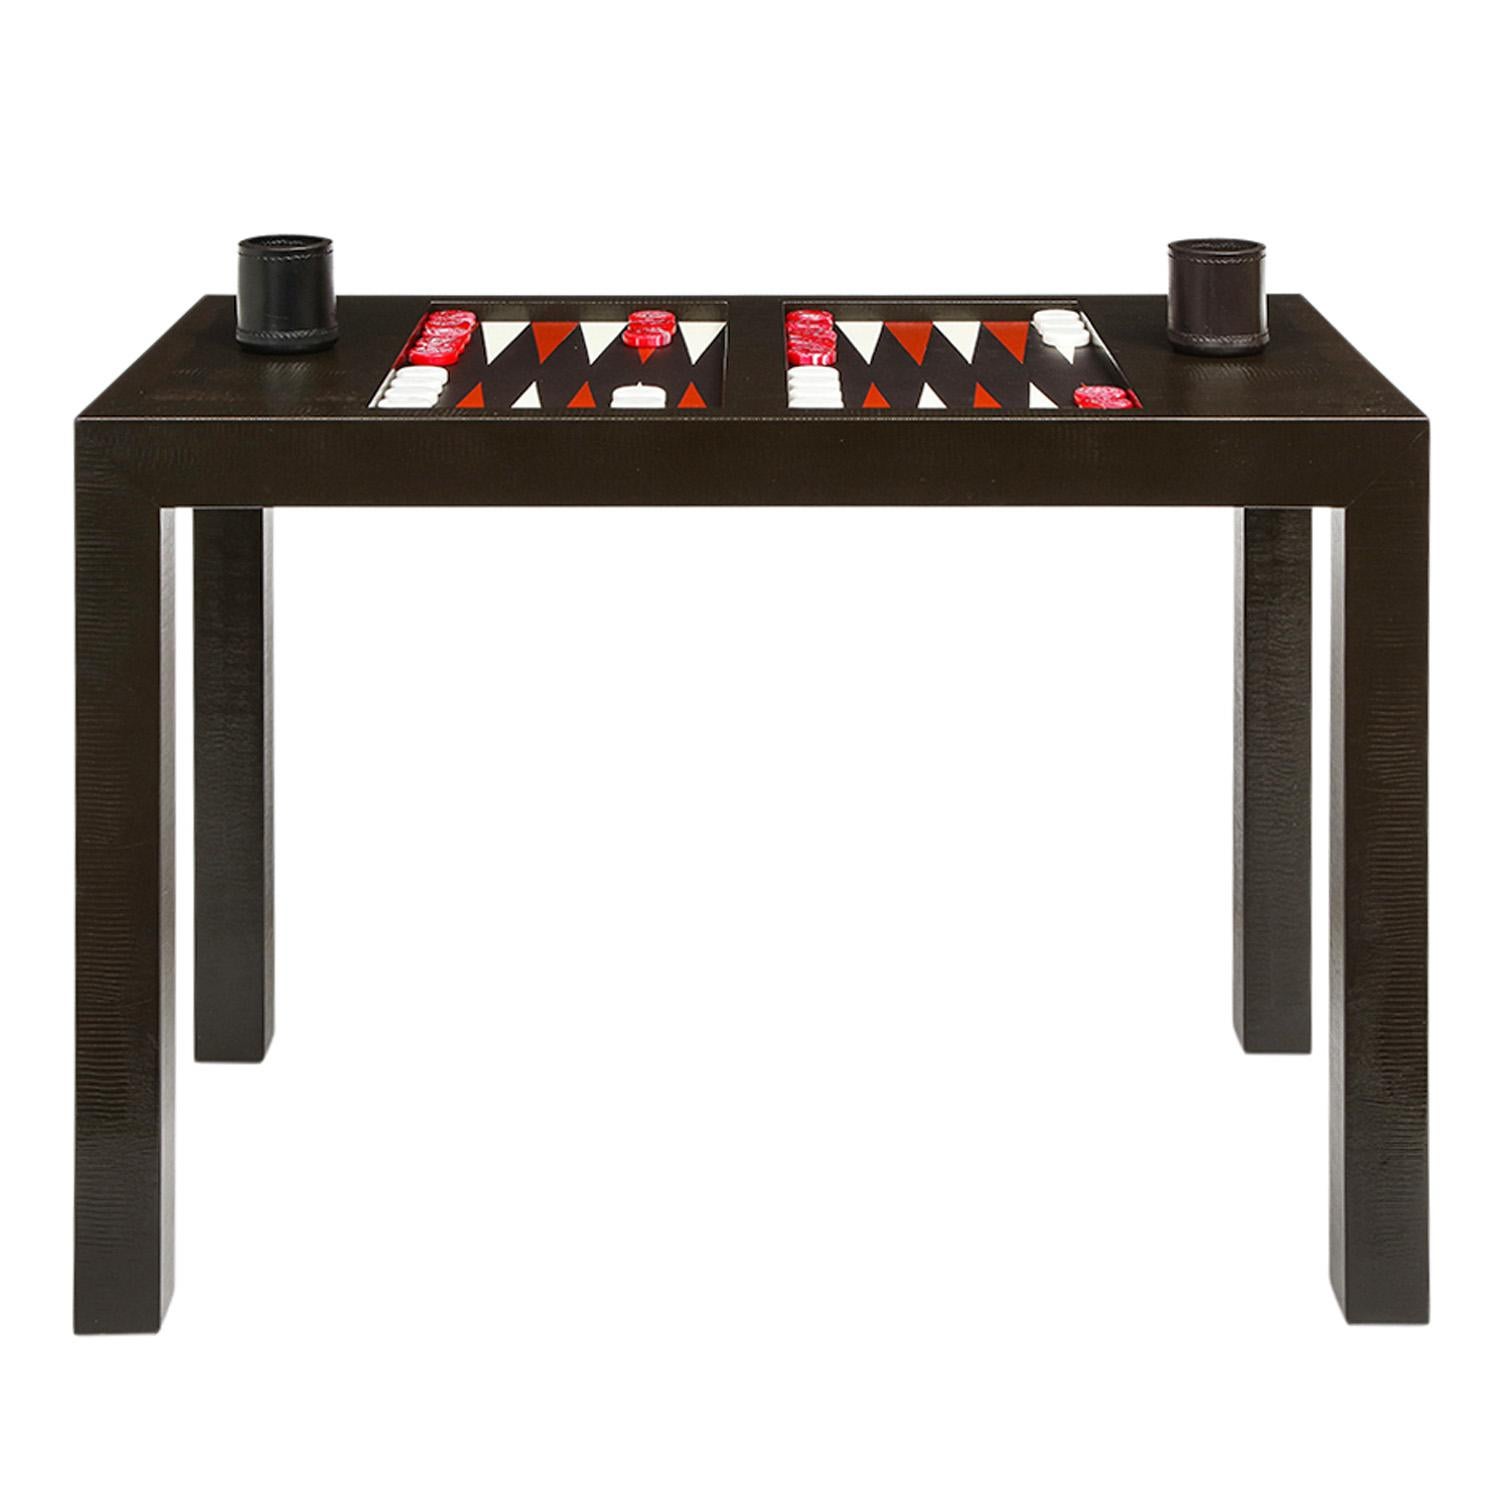 Early and rare game table with backgammon board in embossed lizard leather by Karl Springer, American 1970's (remnants of old Karl Springer leather label on bottom).

Reference:
Karl Springer LTD Brown Paper Catalog published in the 1970’s, page